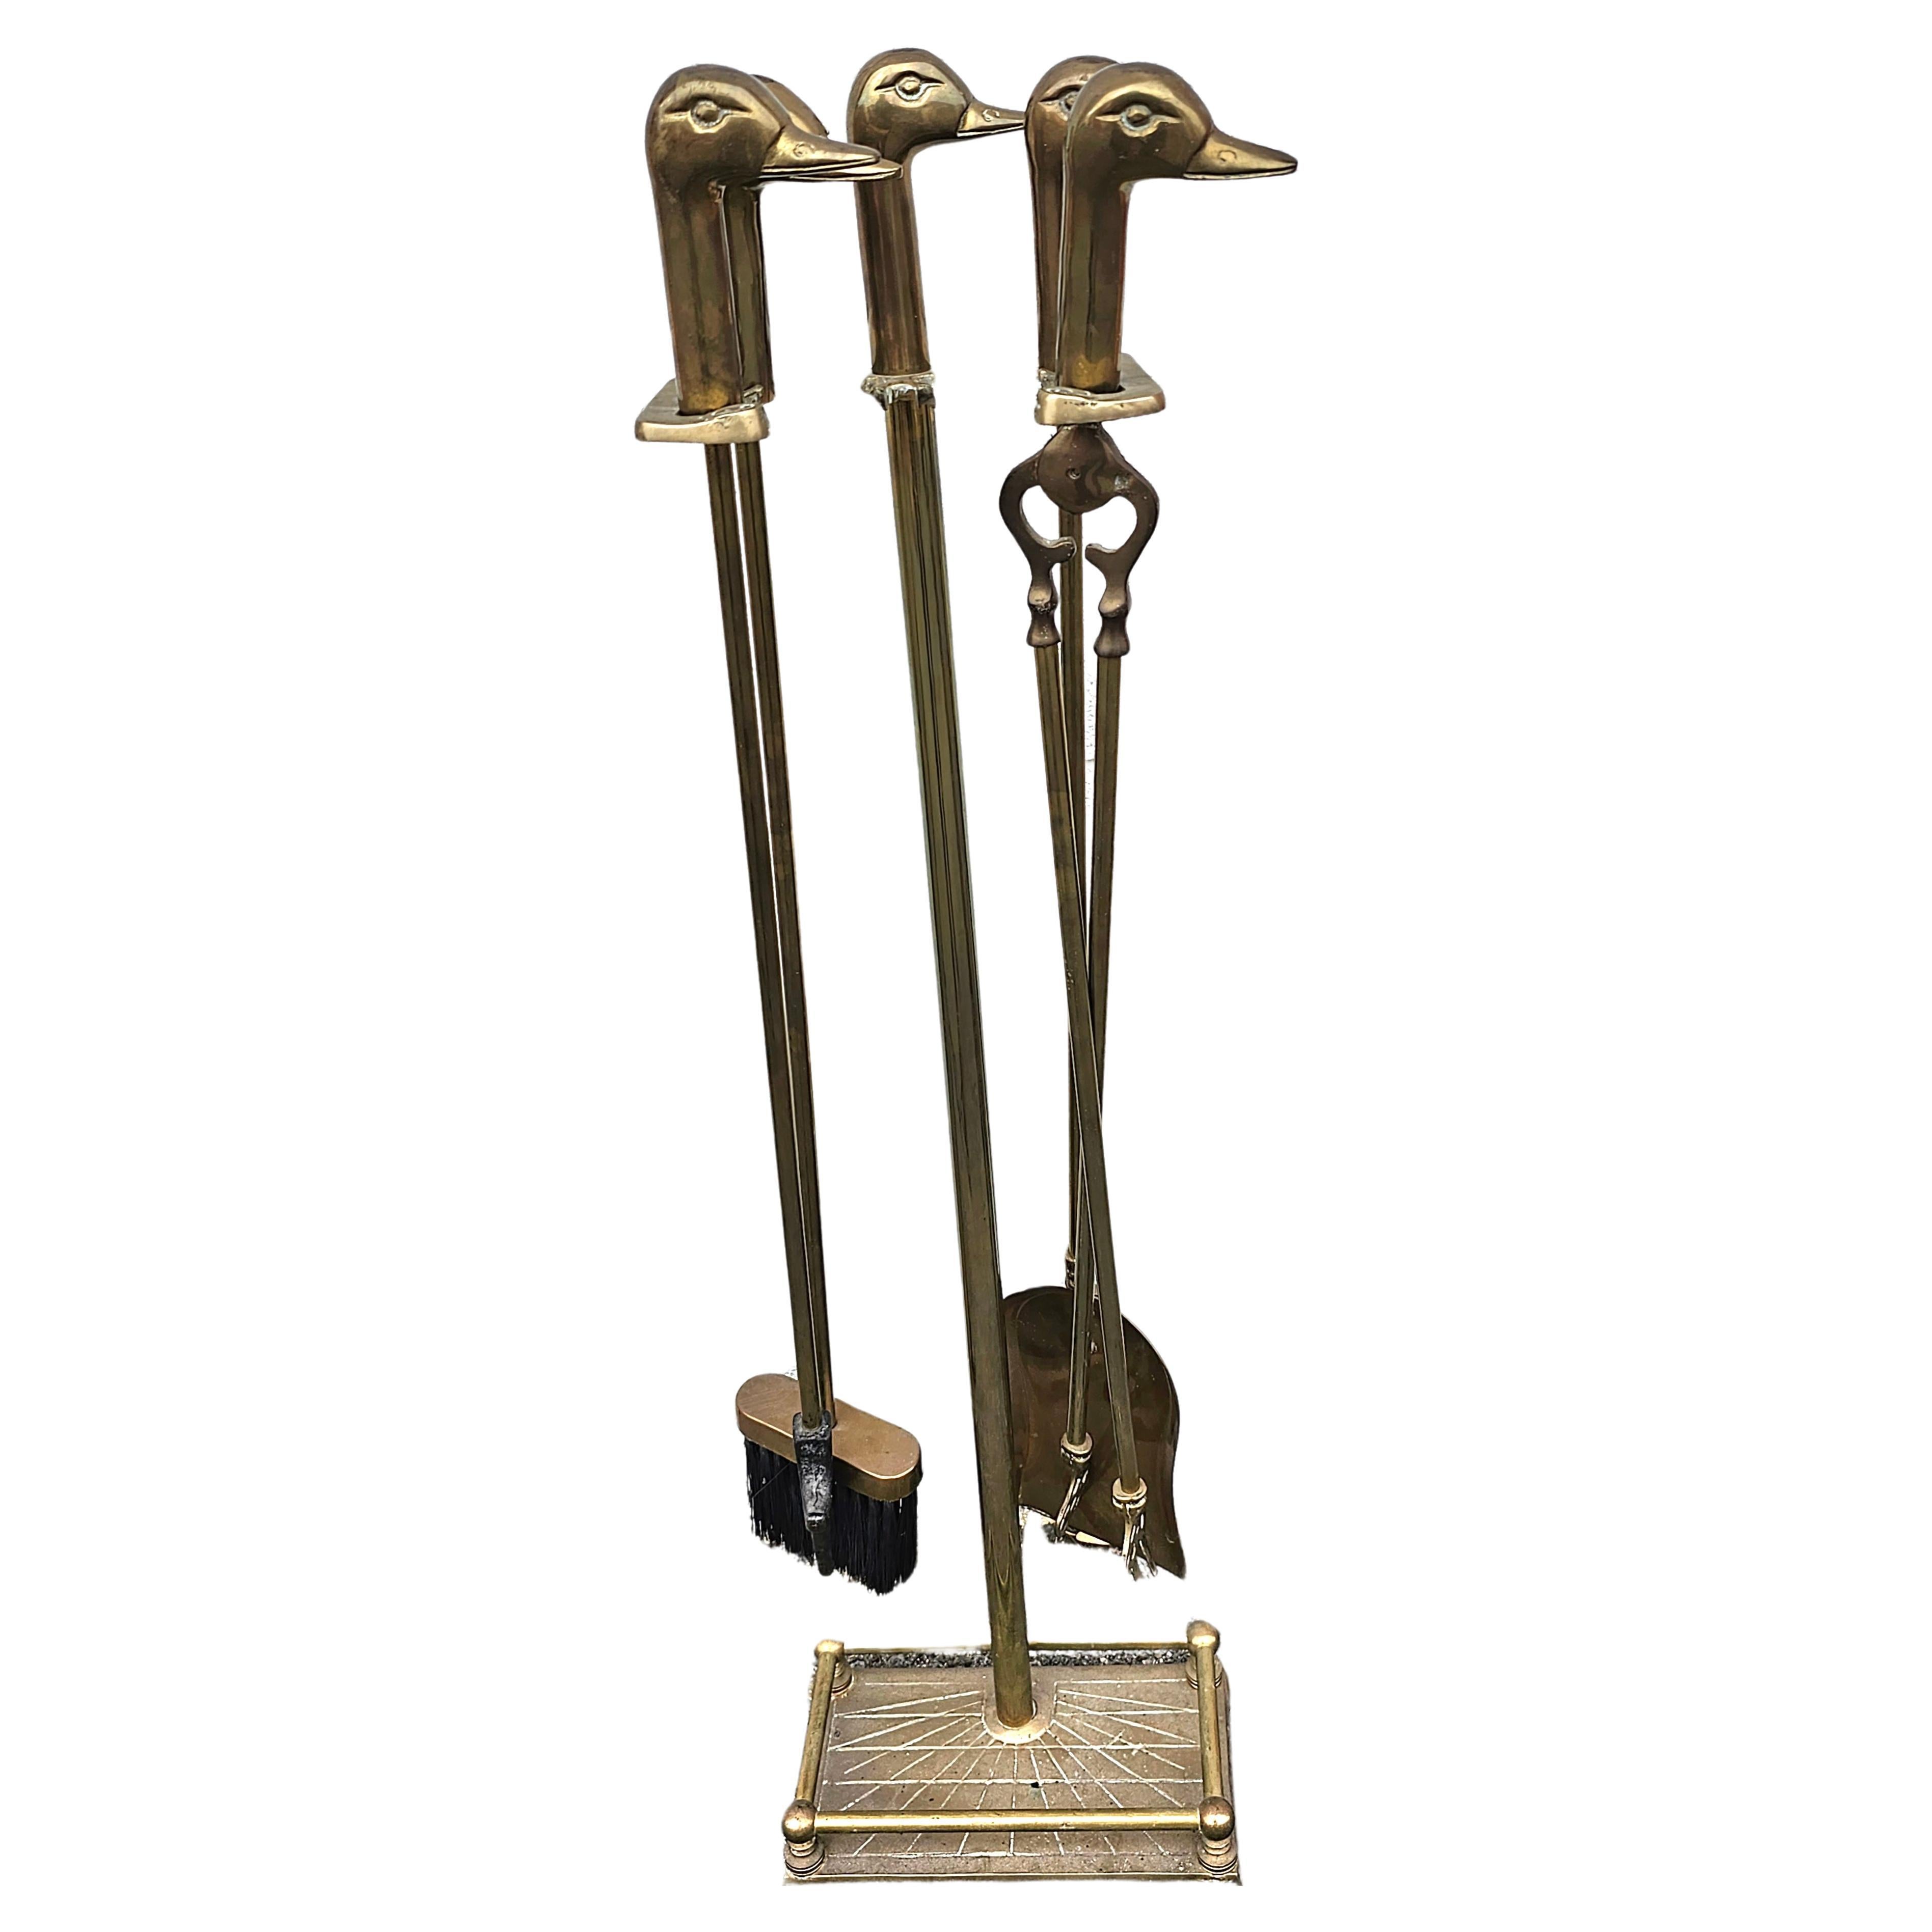 This is a vintage duck head themed fireplace 6 piece  tool set. Figurative duck heads shape the handles of the classic brass fireplace tools and stand. The base has an art deco design. The set includes the stand, a poker, tongs, shovel, and brush.